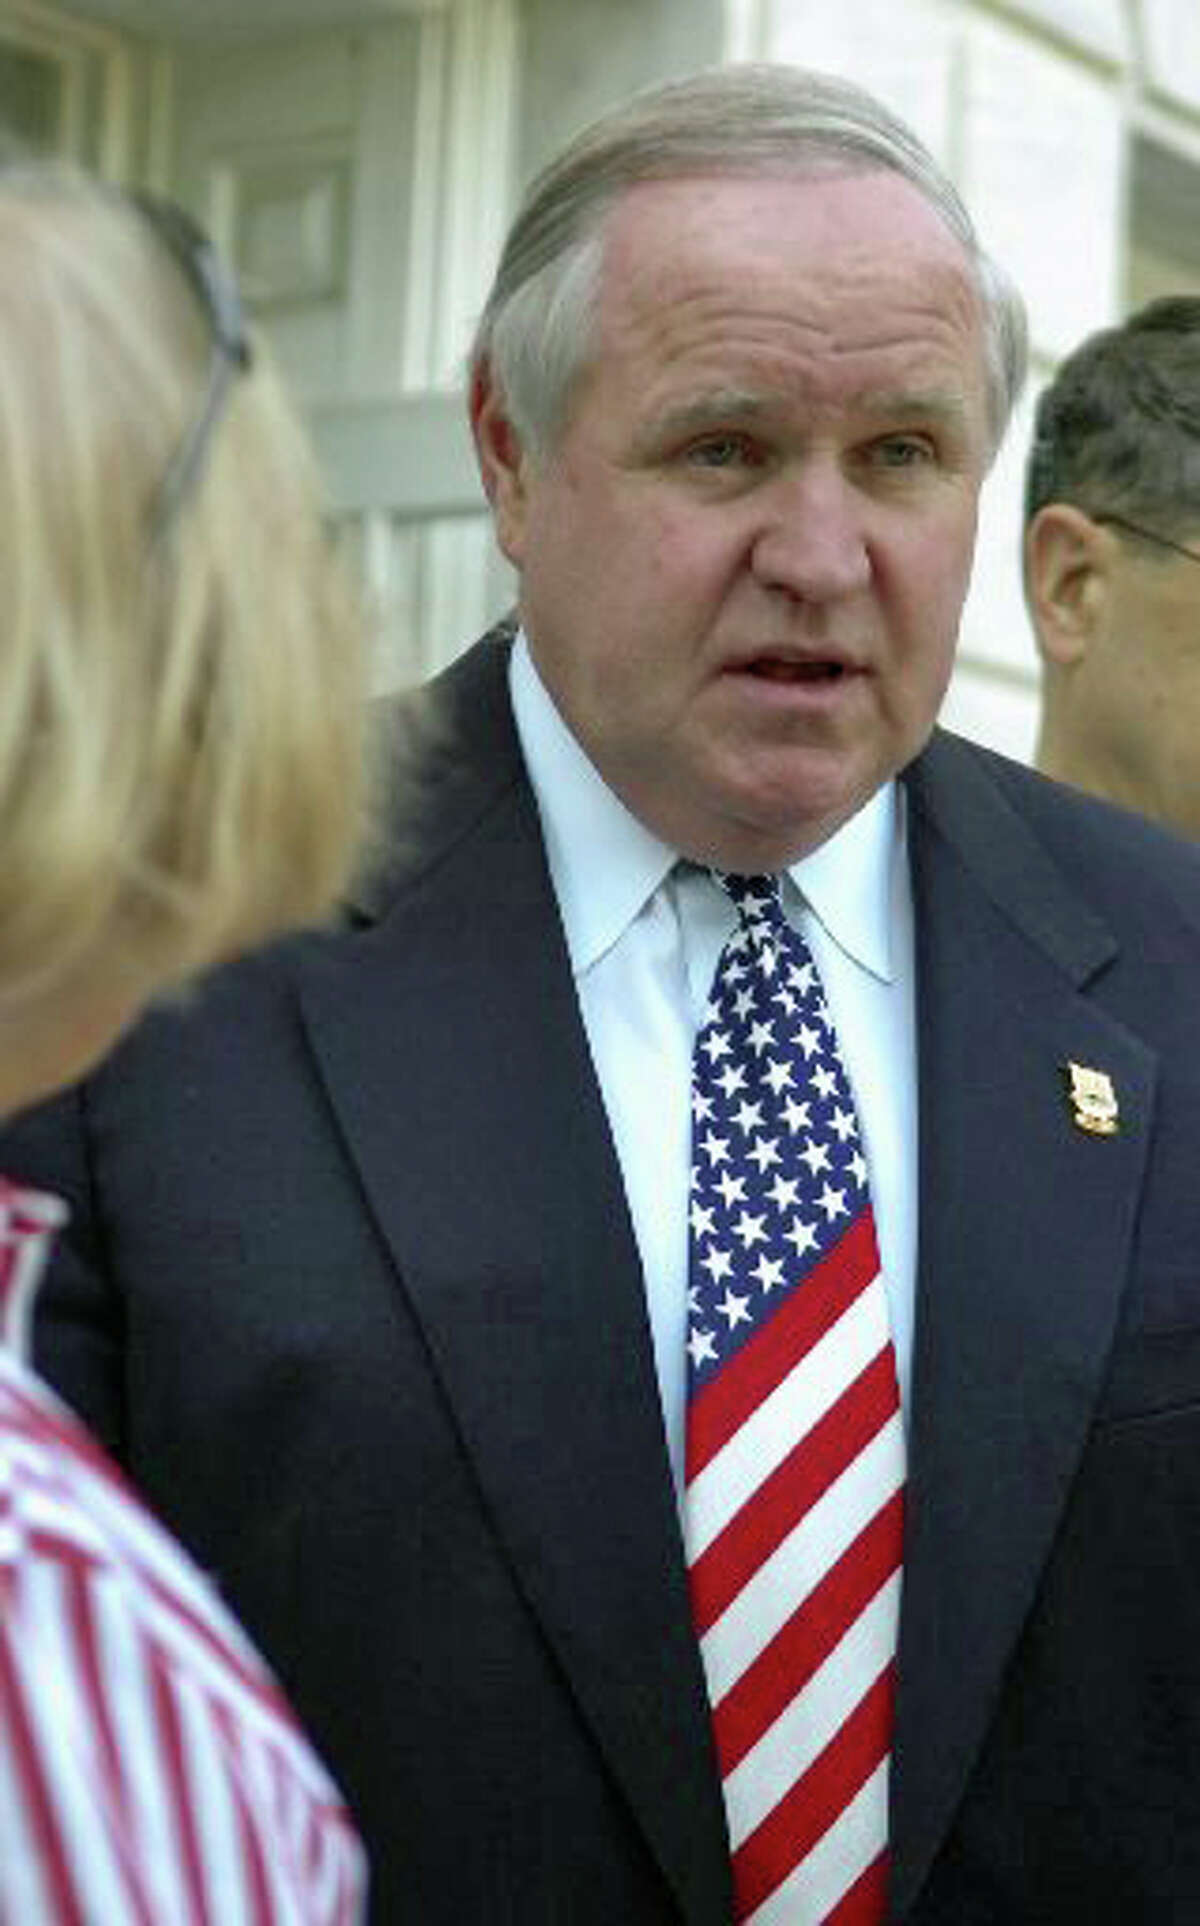 Selectman Dave Theis with his American flag tie at the Fourth of July Ceremony at the Greenwich Town Hall on Sunday, July 4, 2010.